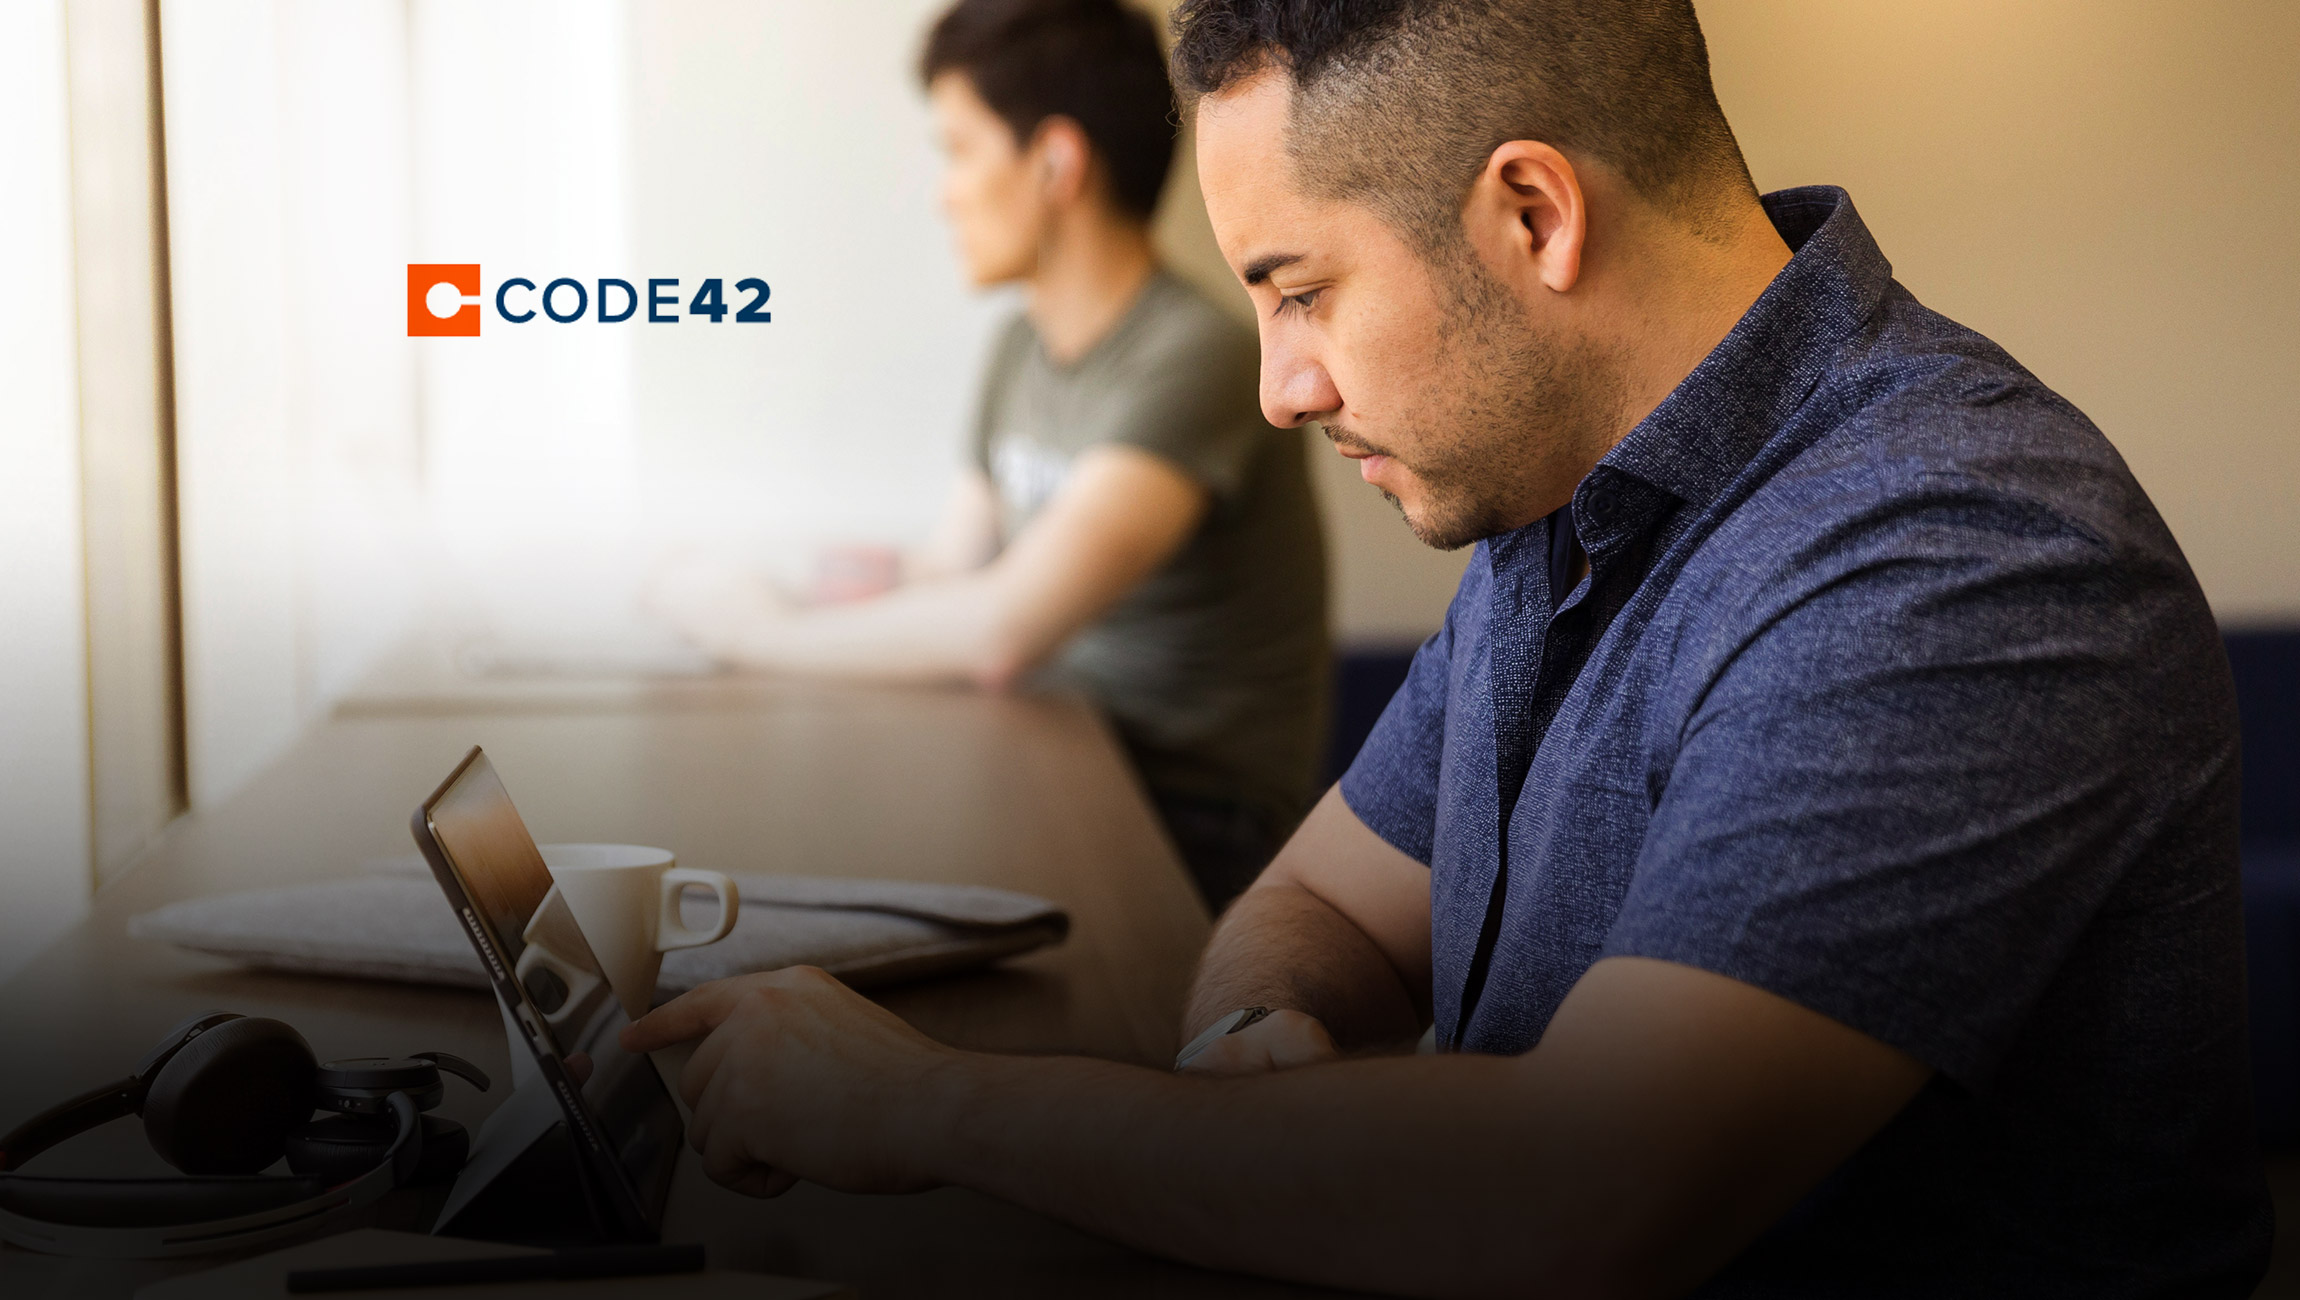 Code42 Announces Its Accelerate Partner Program, Increases Partners on Board over 200%